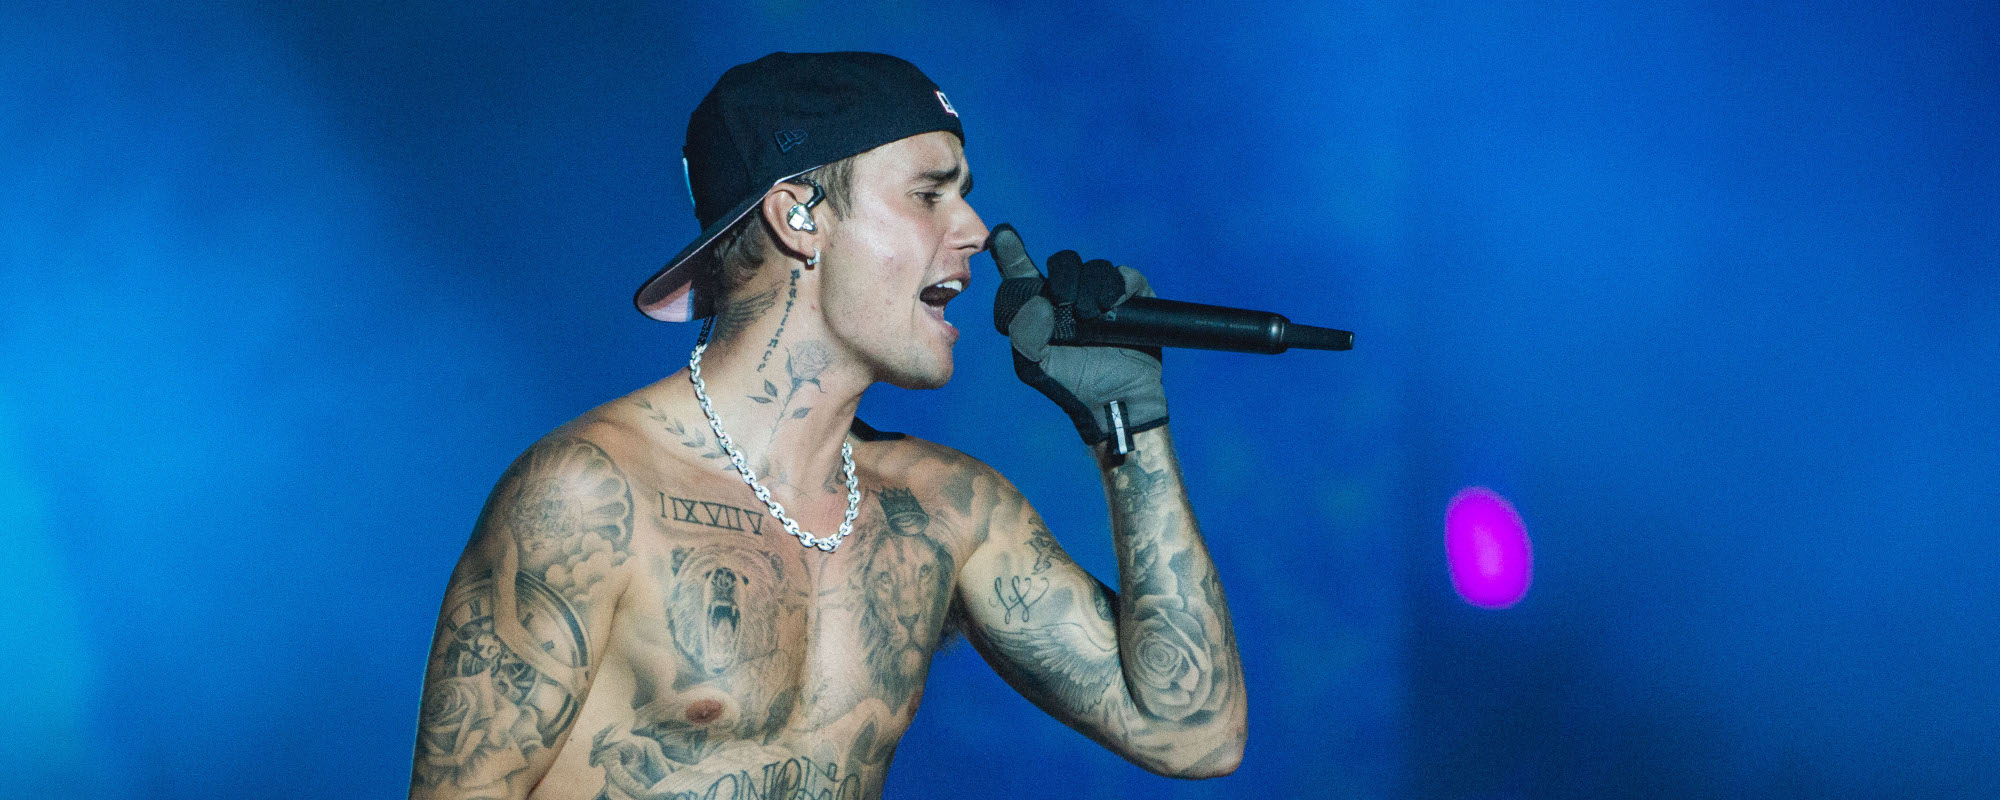 Justin Bieber Cancels Remaining Dates of Justice World Tour Following Recent Health Diagnosis